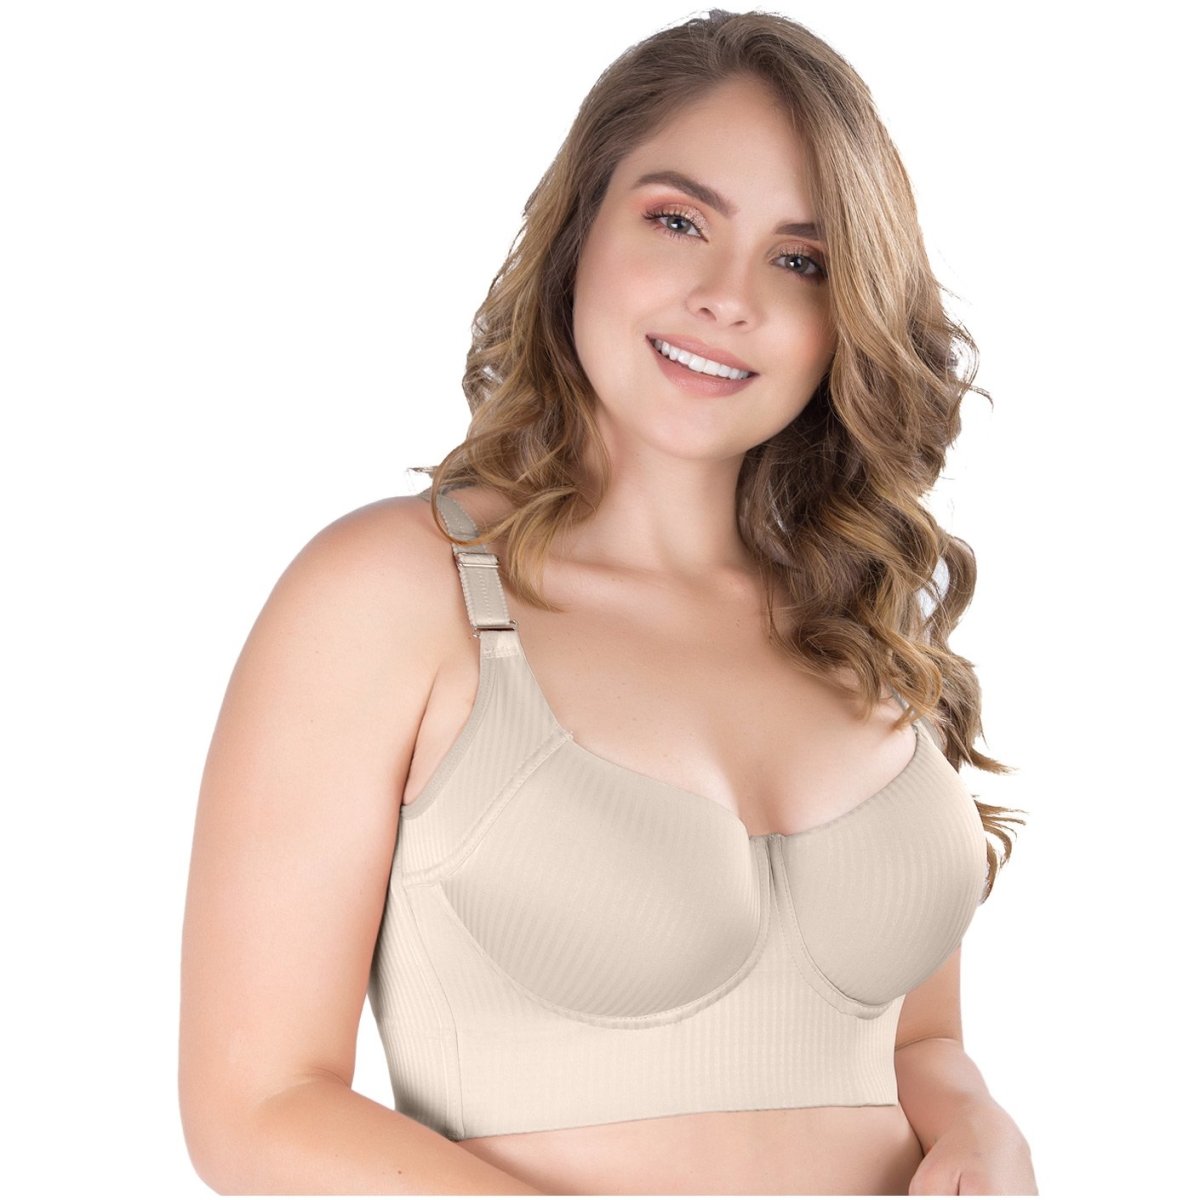 UpLady 8542 Extra Firm Control Full Cup Bra with Side Support - Colombian Body Shaper